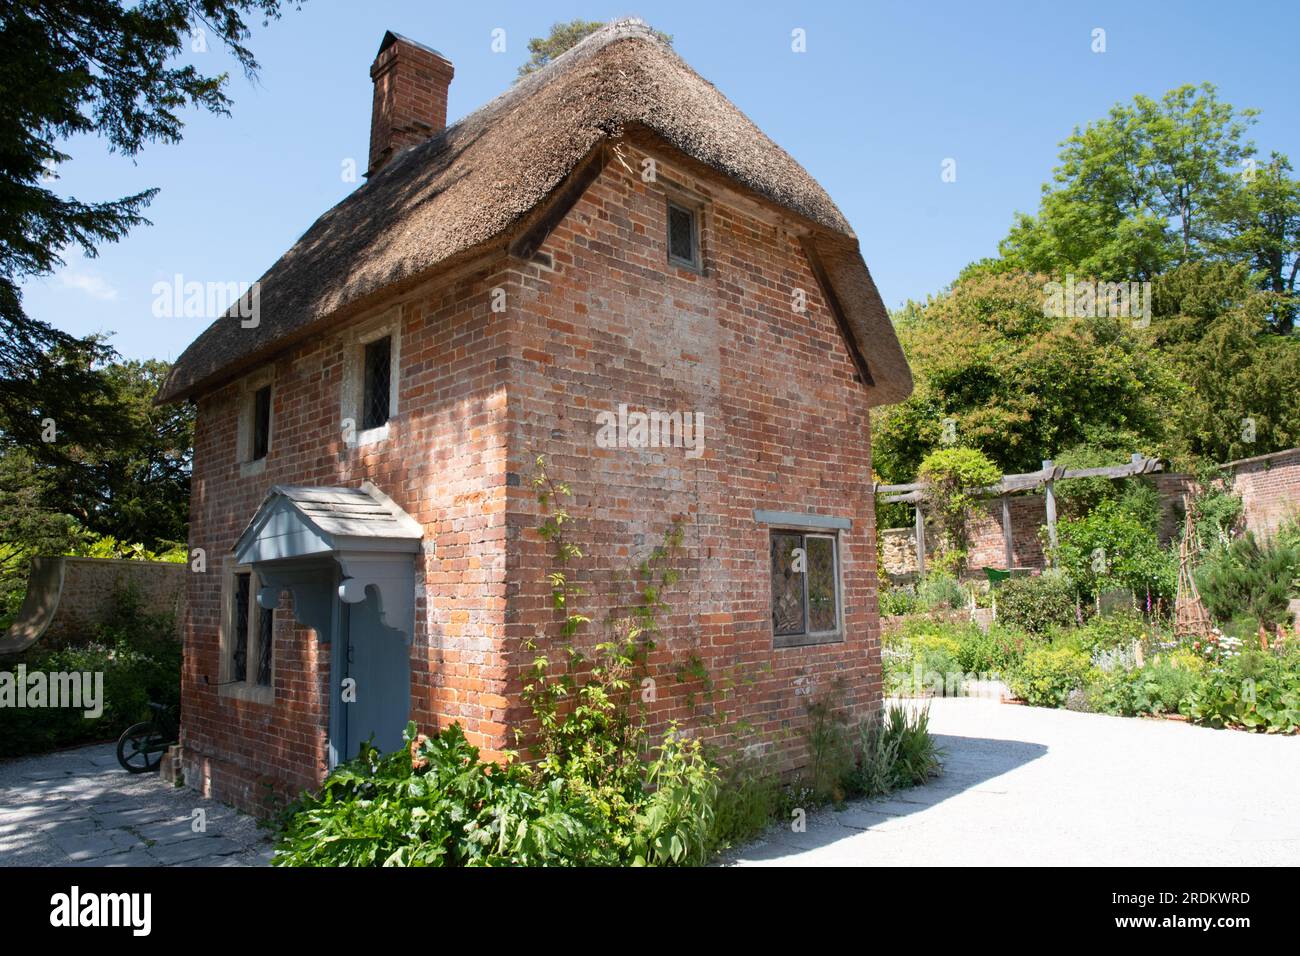 Thatched Cottage in the walled garden at The Newt Somerset Stock Photo